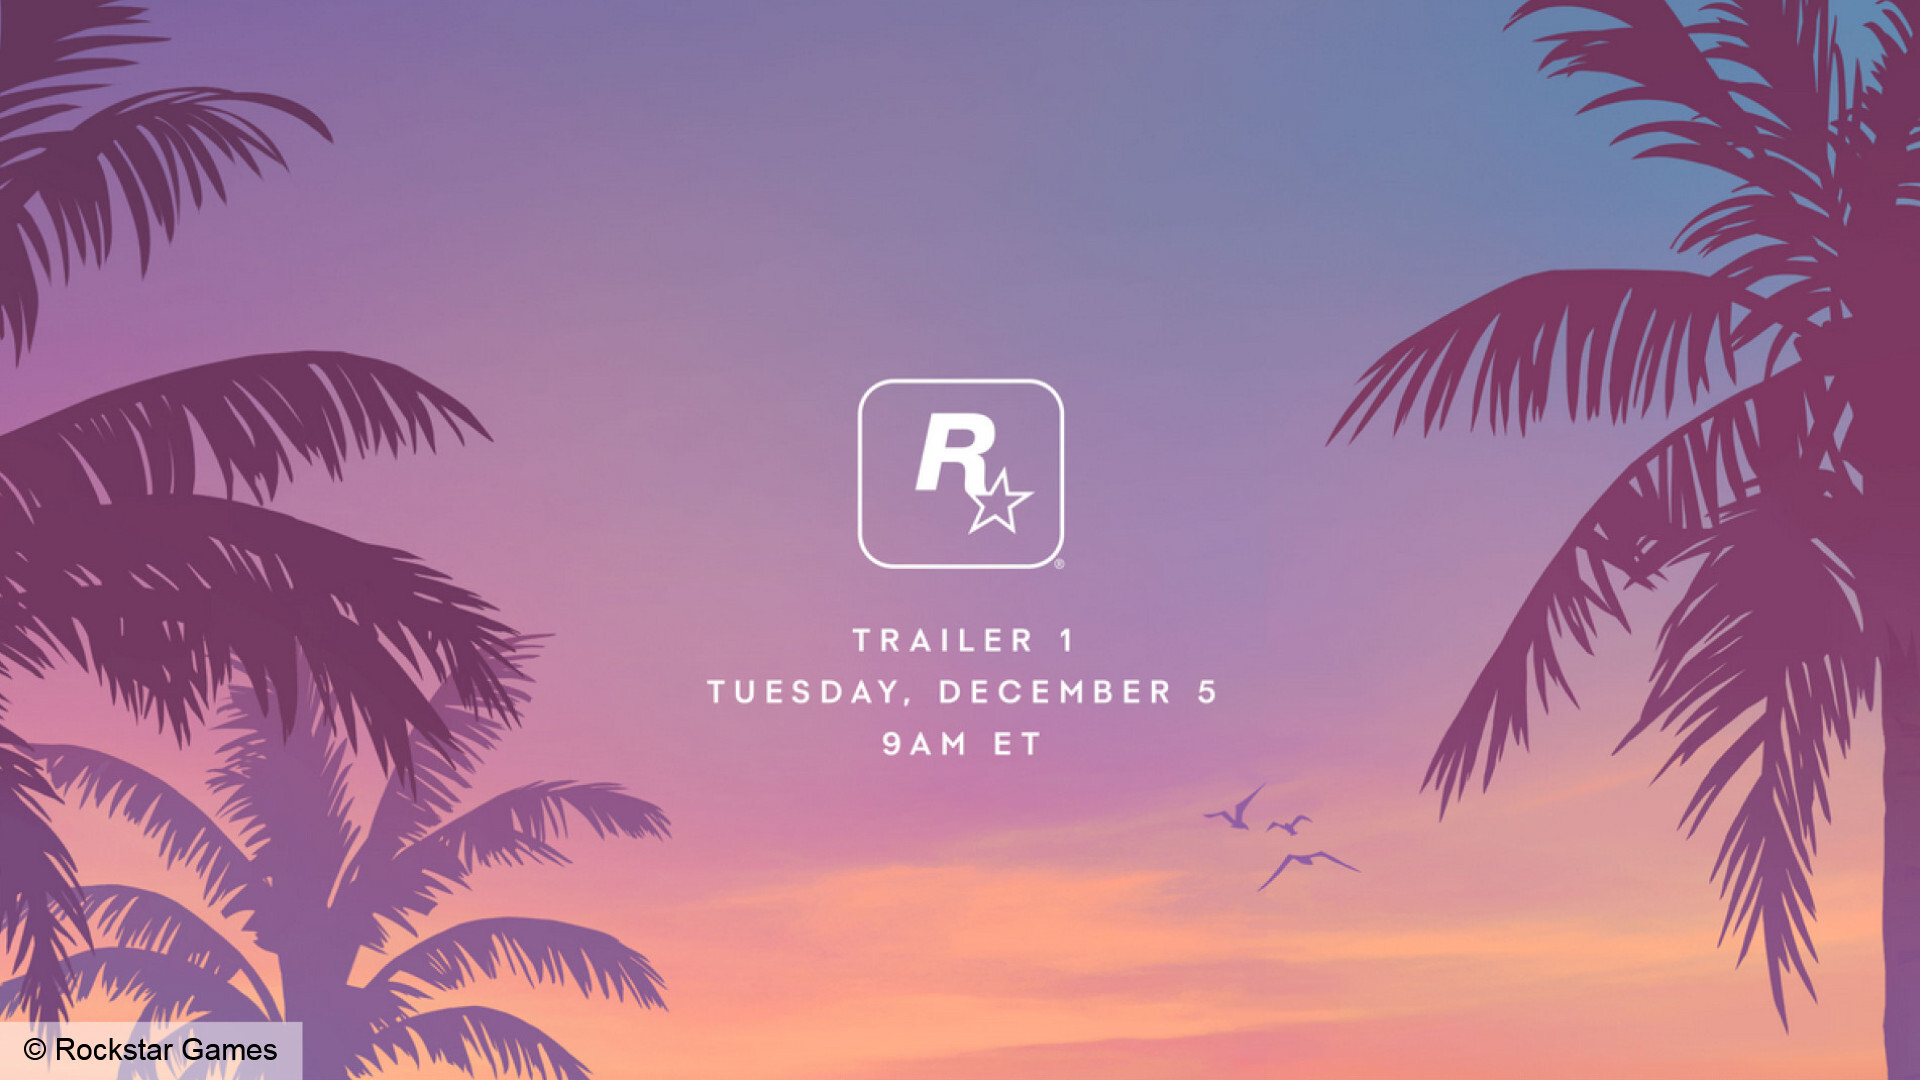 GTA 6 trailer date confirmed, as Rockstar teases return to Vice City